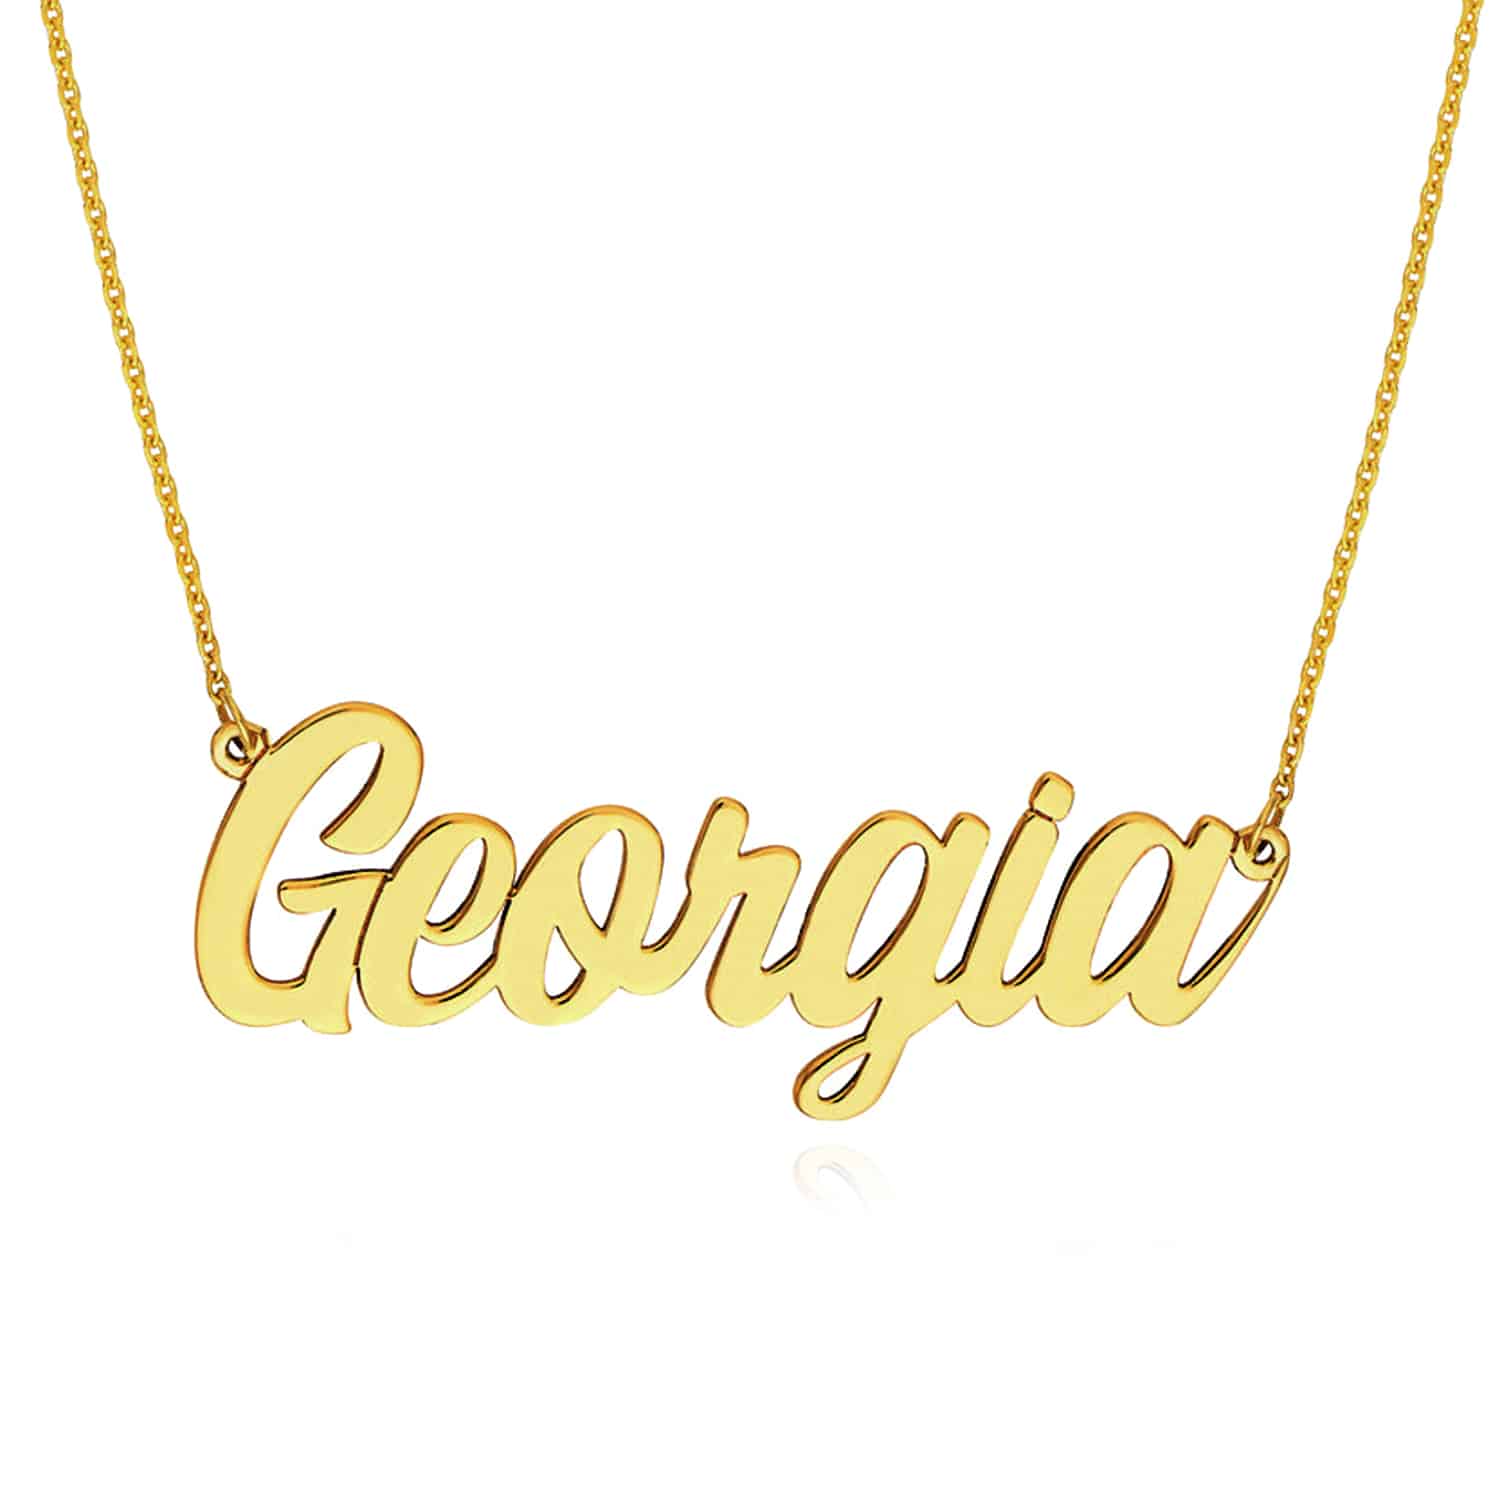 Customizable 14K Gold Yellow White Rose Script Font Nameplate Pendant Necklace - Yellow Gold, 16"-18" Adjustable